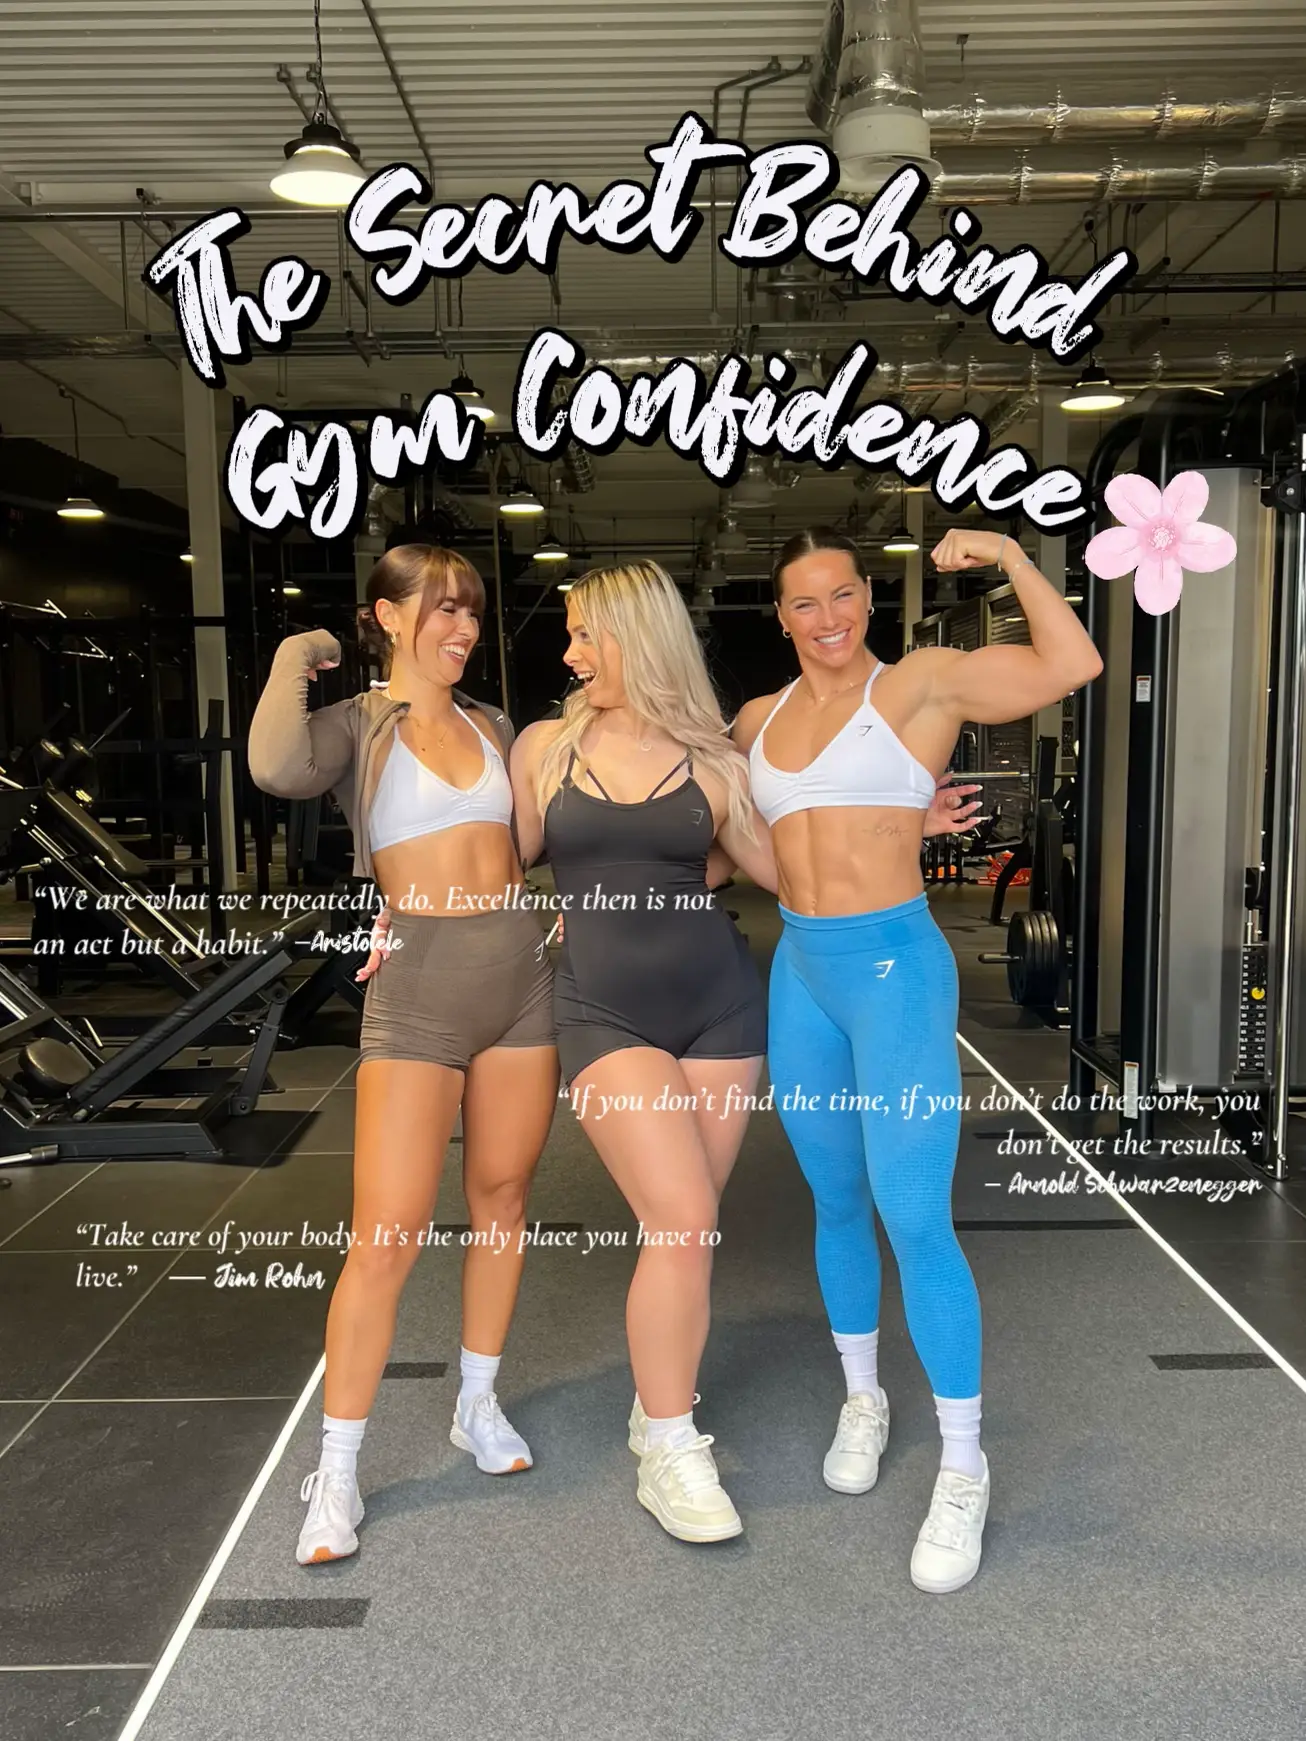 Become the most confident person in the gym 🌸